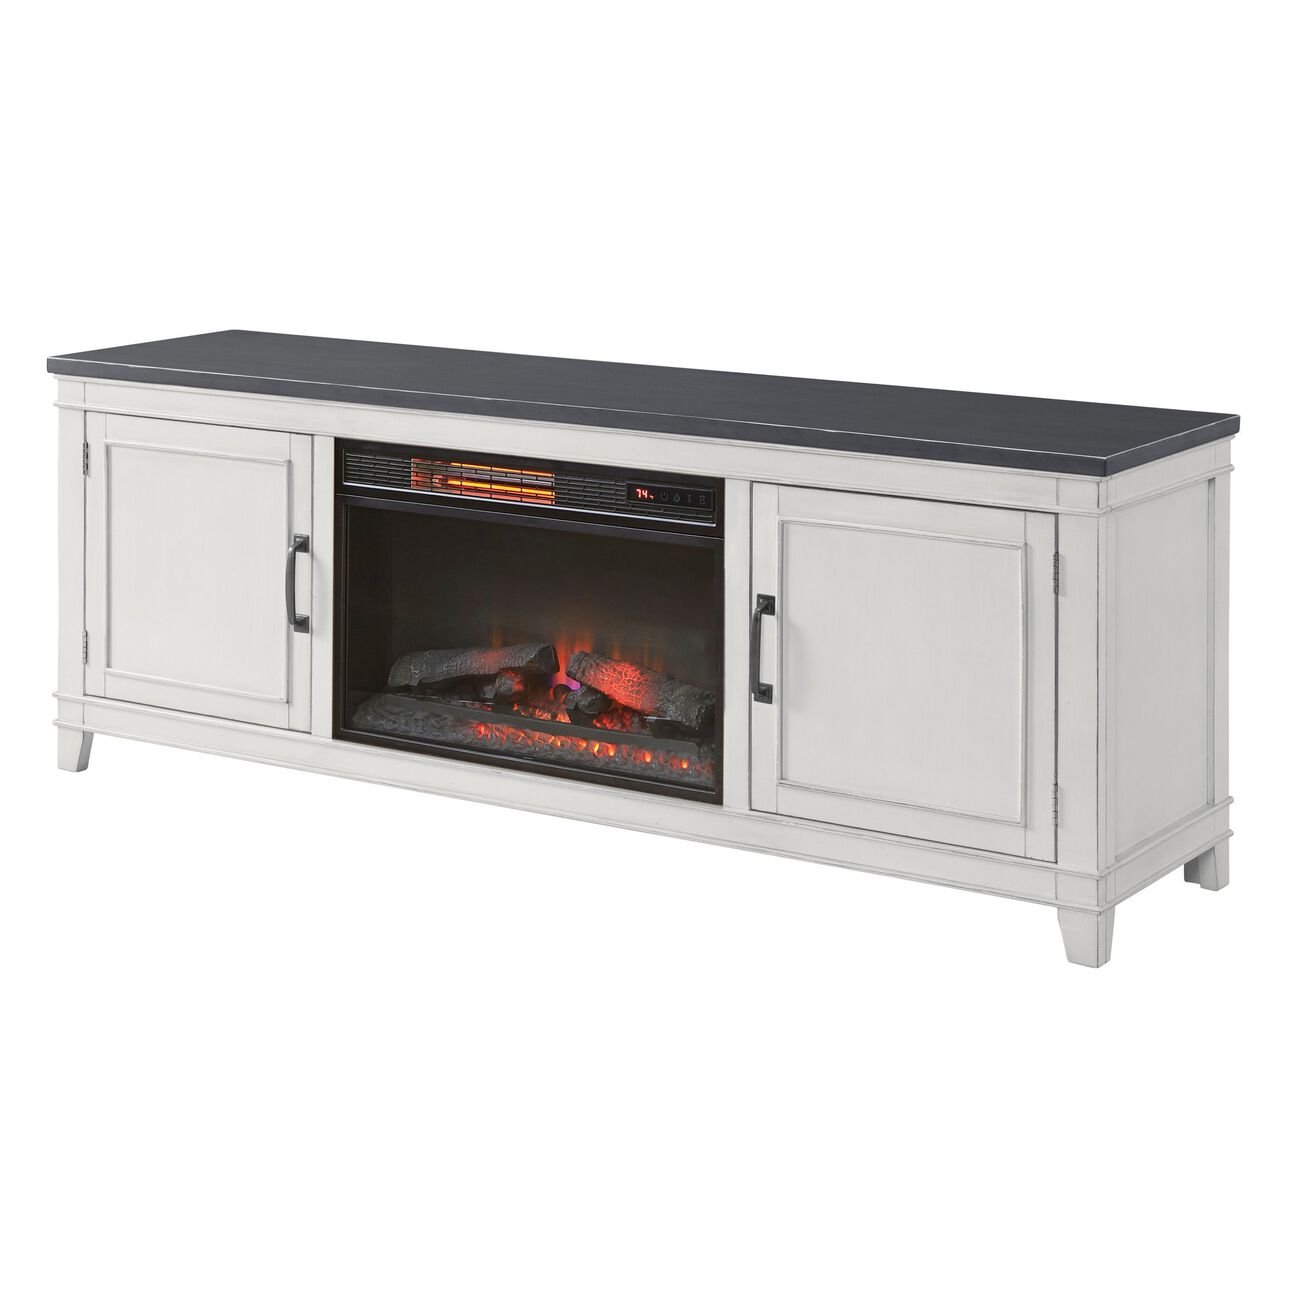 70 Inch Wooden TV Stand with Electric Fireplace, Gray and Antique White